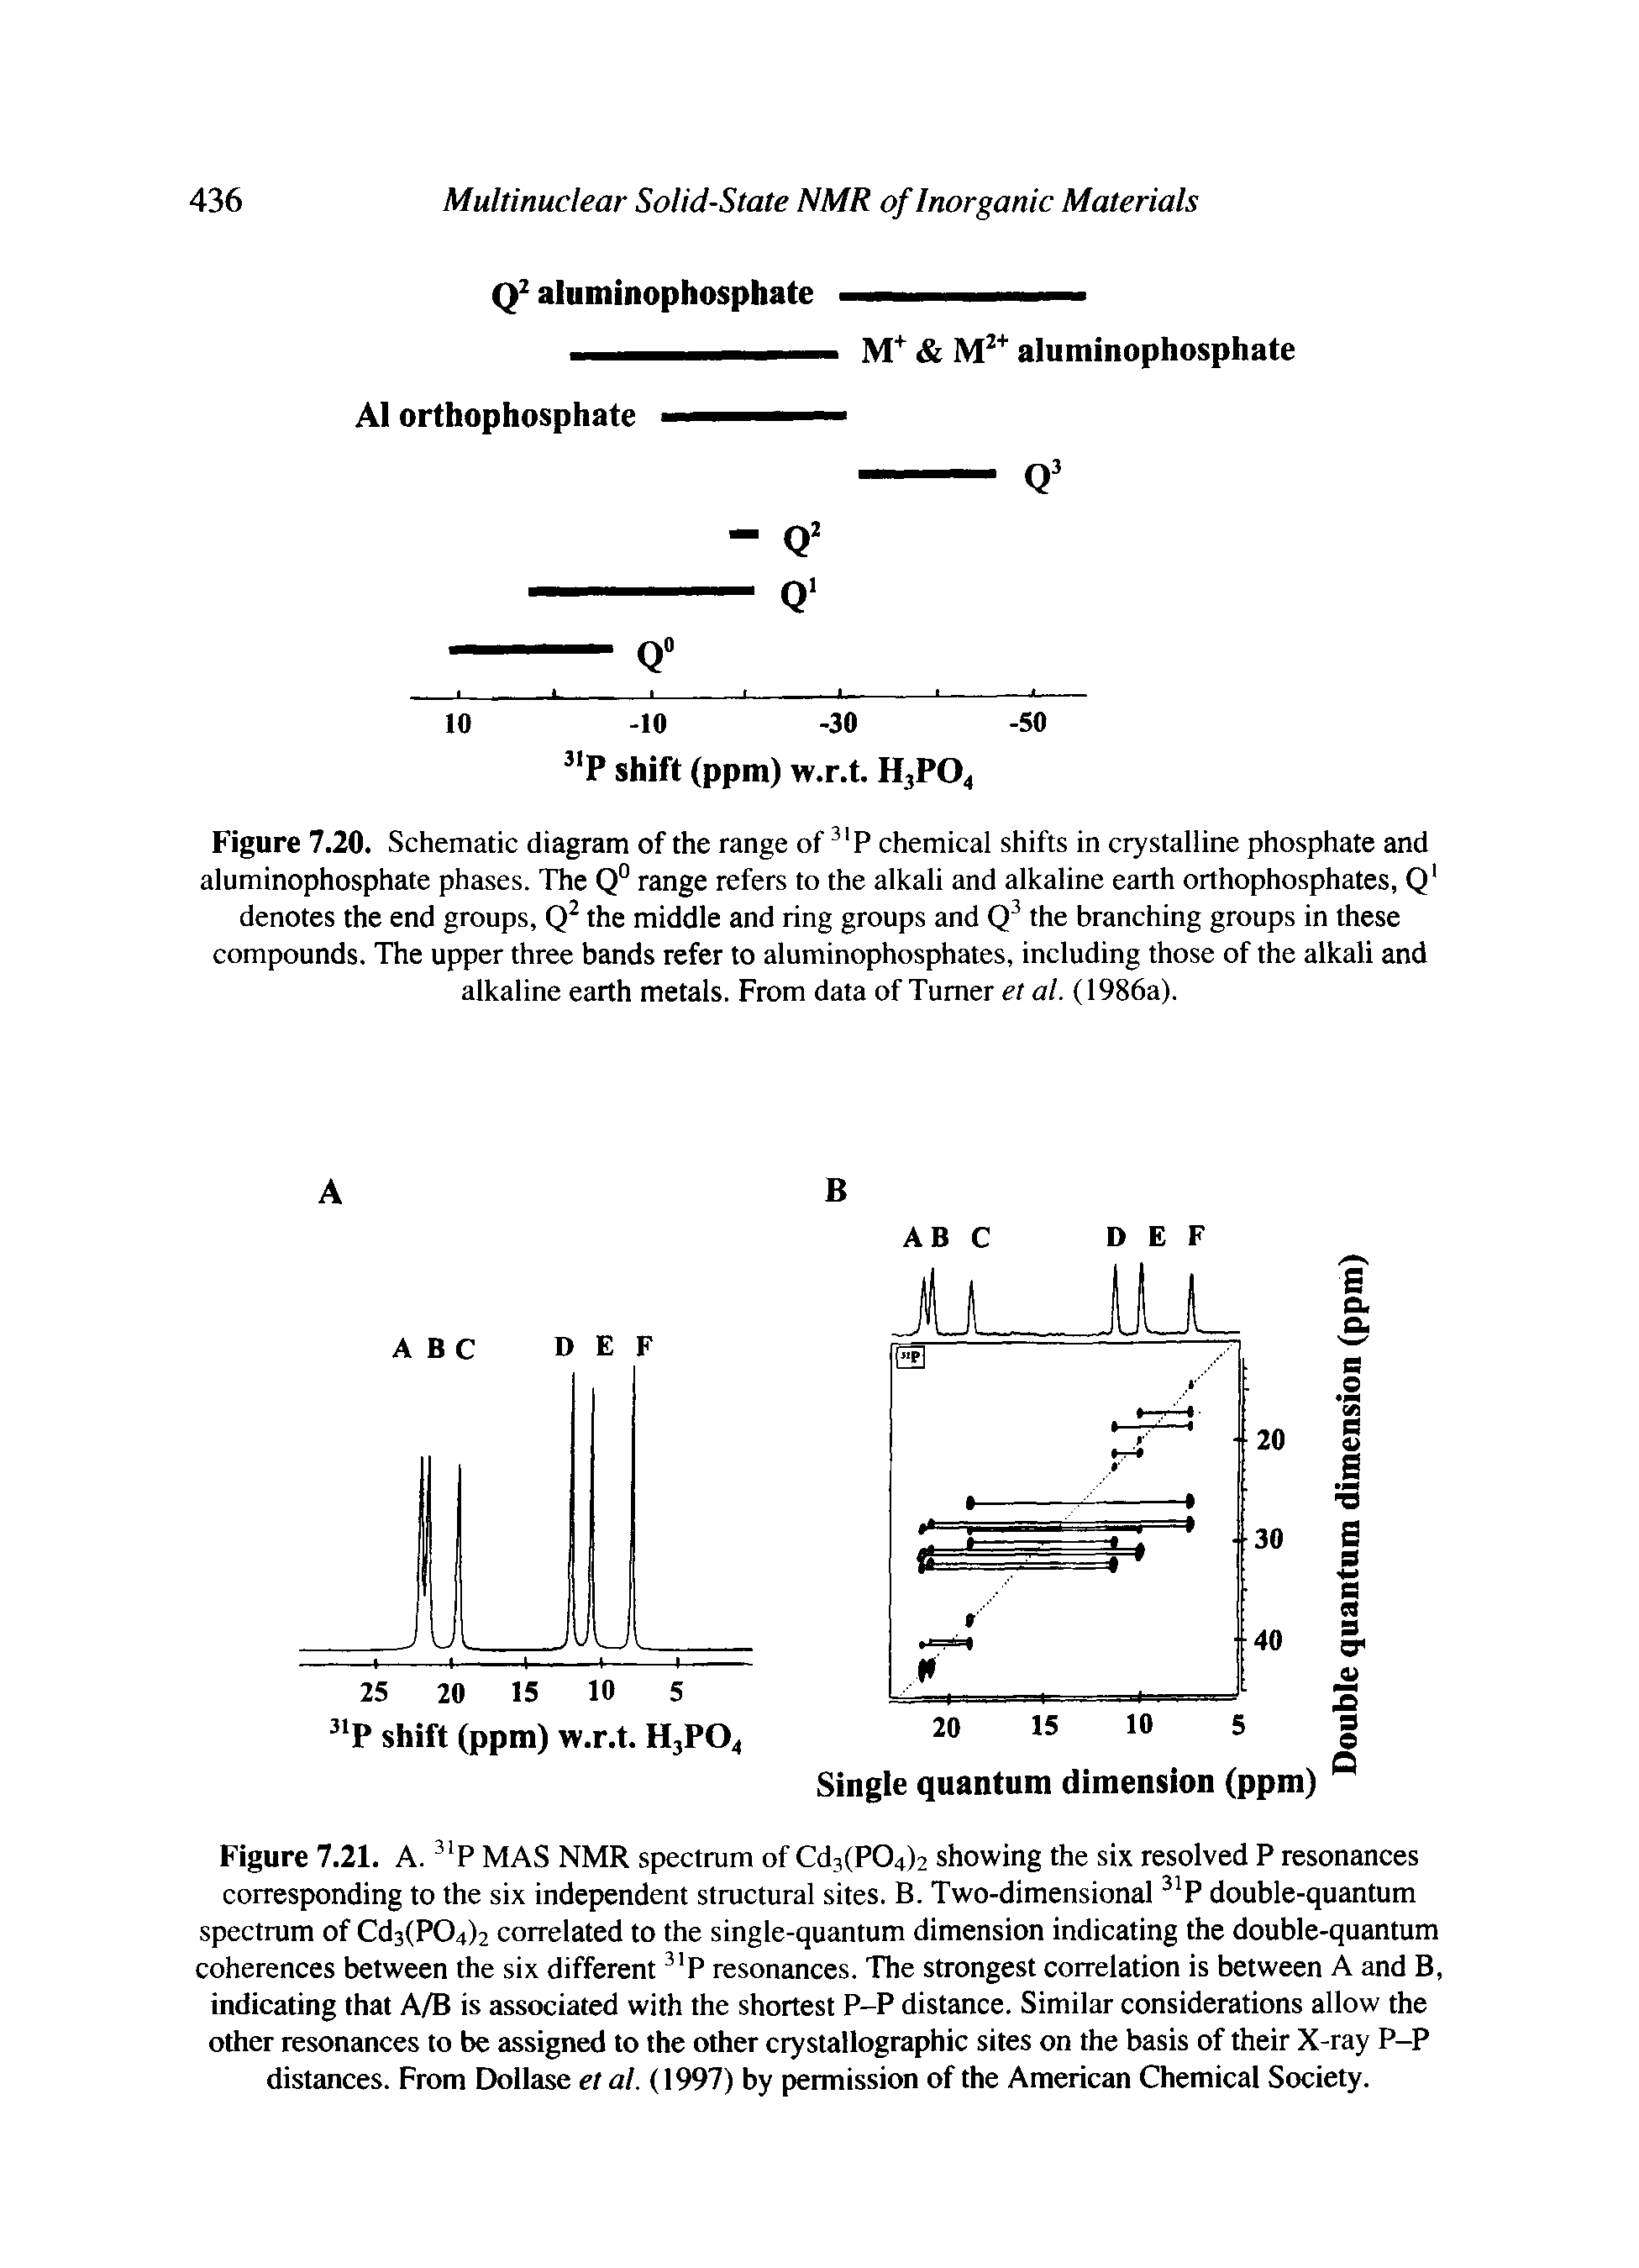 Figure 7.21. A. P MAS NMR spectrum of Cd3(P04)2 showing the six resolved P resonances corresponding to the six independent structural sites. B. Two-dimensional P double-quantum spectrum of Cd3(P04)2 correlated to the single-quantum dimension indicating the double-quantum coherences between the six different P resonances. The strongest correlation is between A and B, indicating that A/B is associated with the shortest P-P distance. Similar considerations allow the other resonances to be assigned to the other crystallographic sites on the basis of their X-ray P-P distances. From Dollase et al. (1997) by permission of the American Chemical Society.